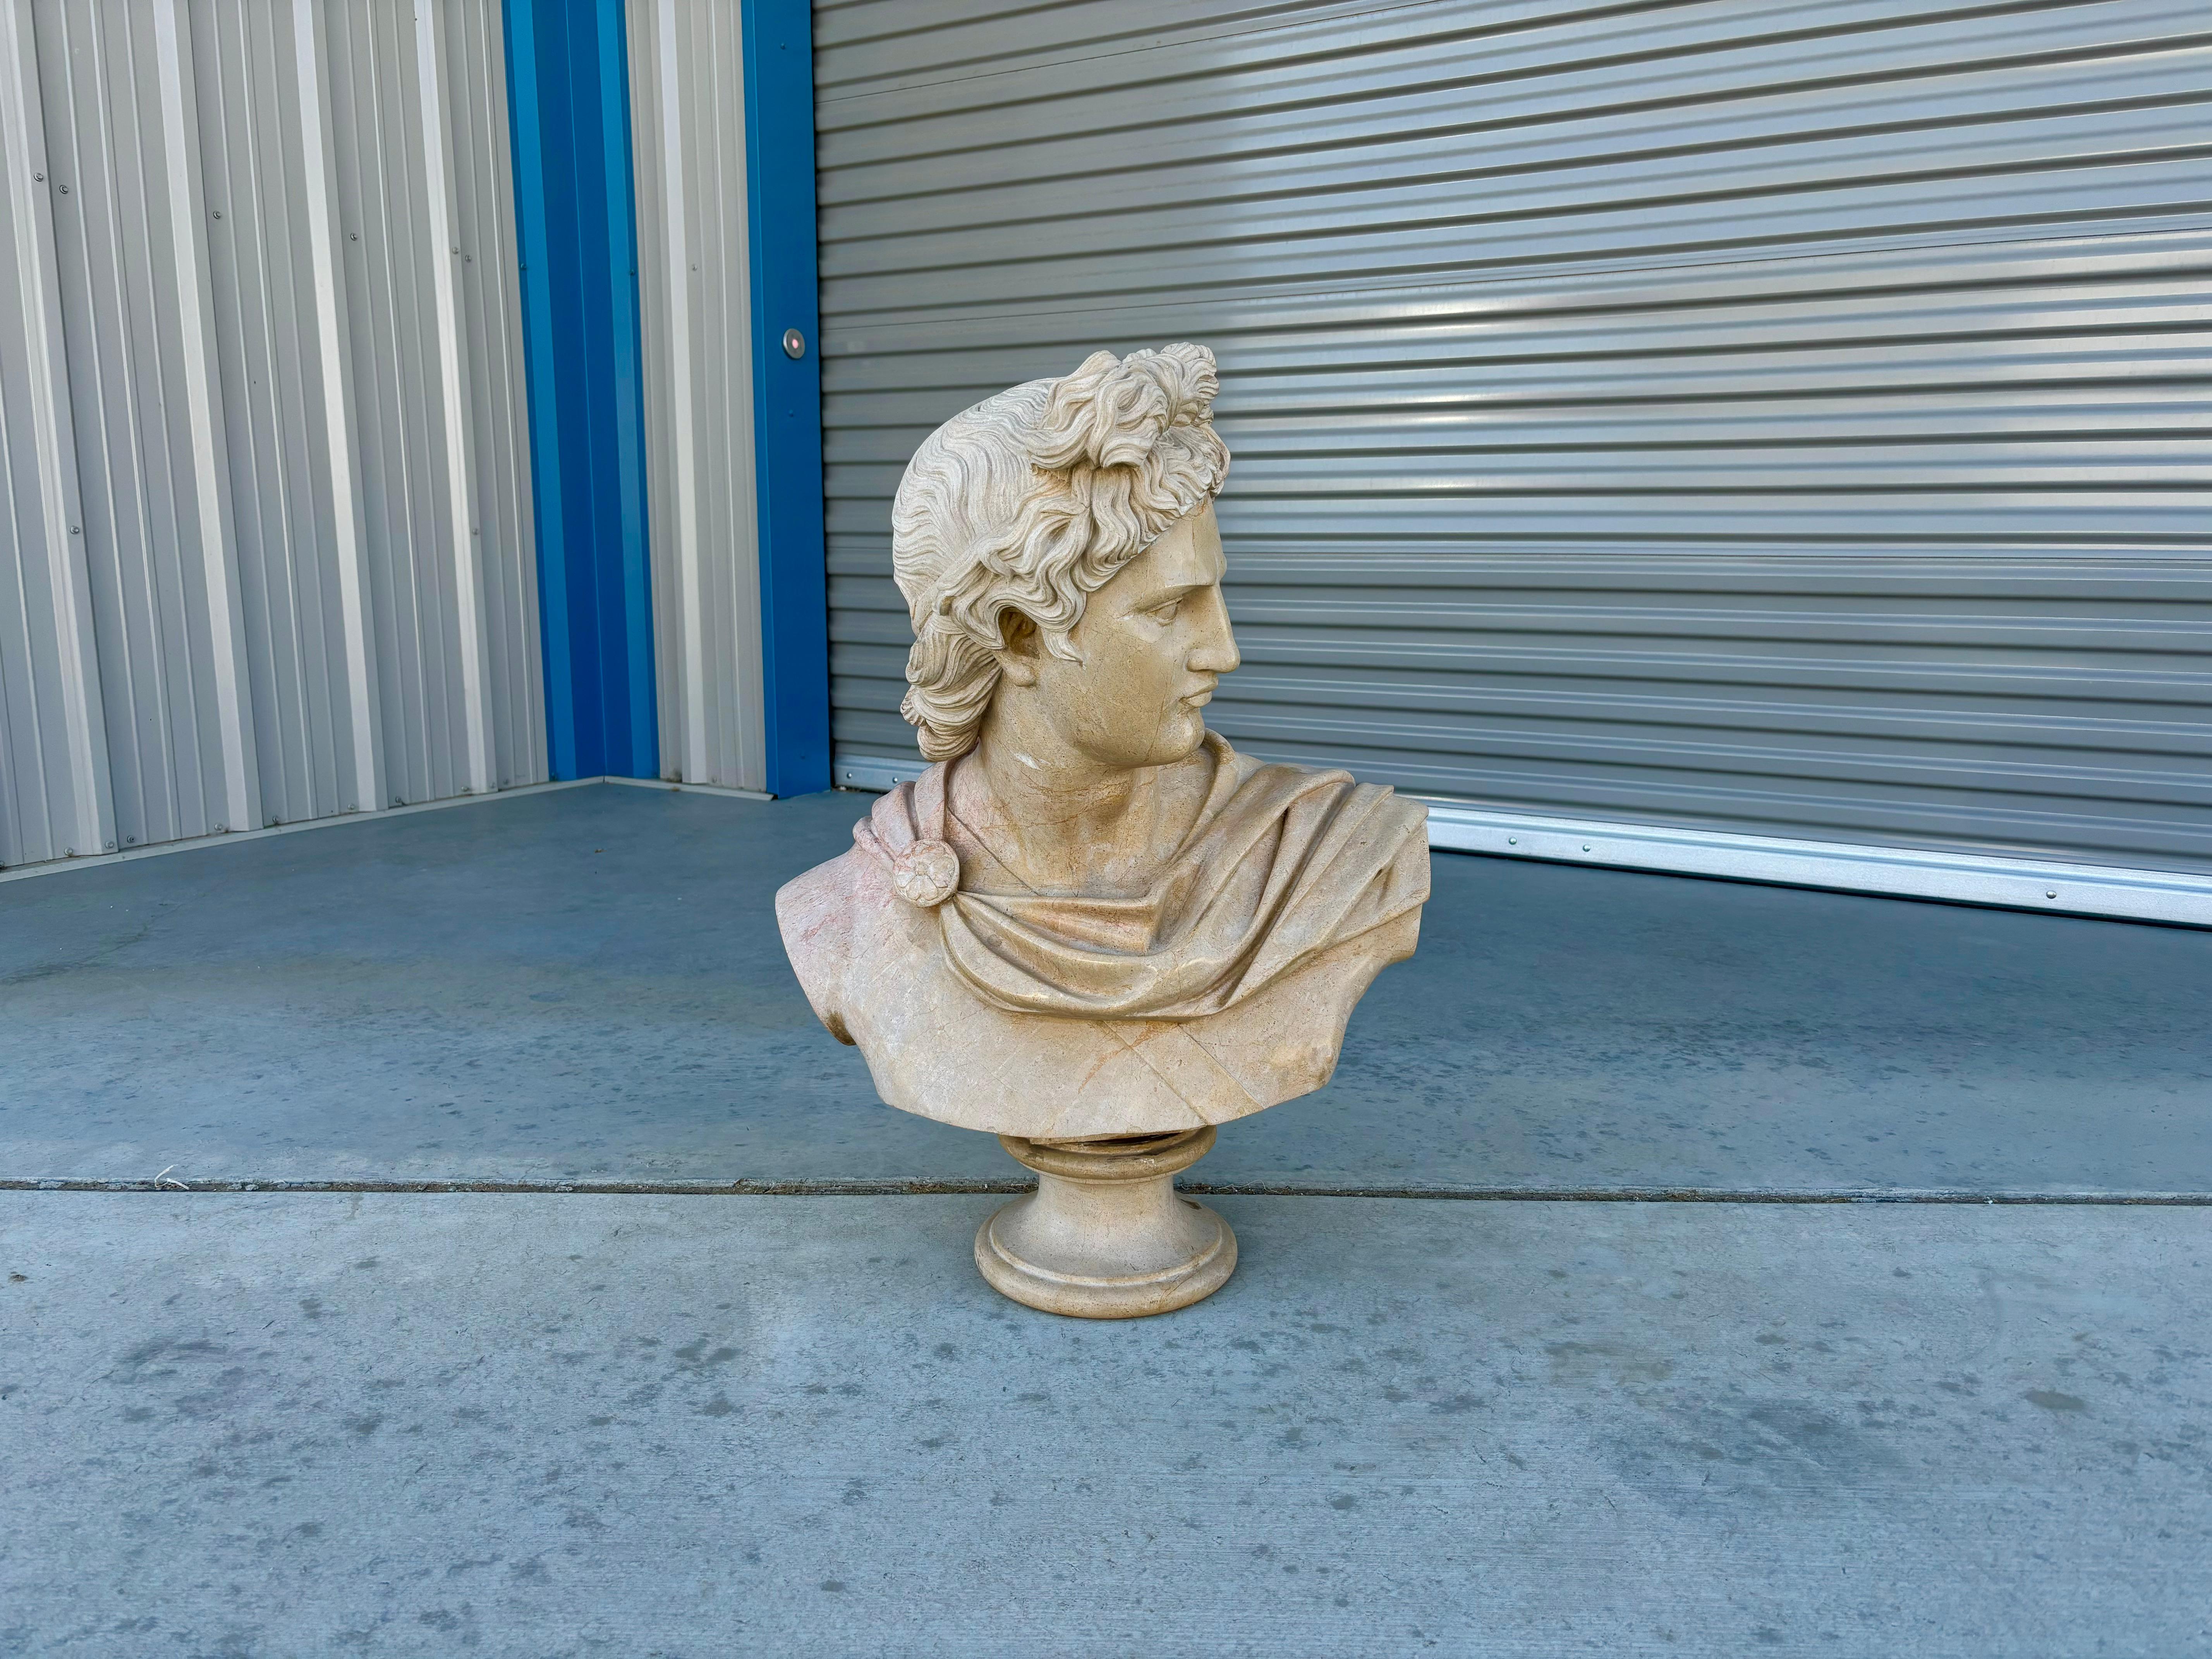 Vintage marble bust of Apollo designed and manufactured in Italy circa the 19th century. The stunning marble frame showcases the intricate details of Apollo's chiseled features, capturing the god's essence of beauty and grace. This magnificent